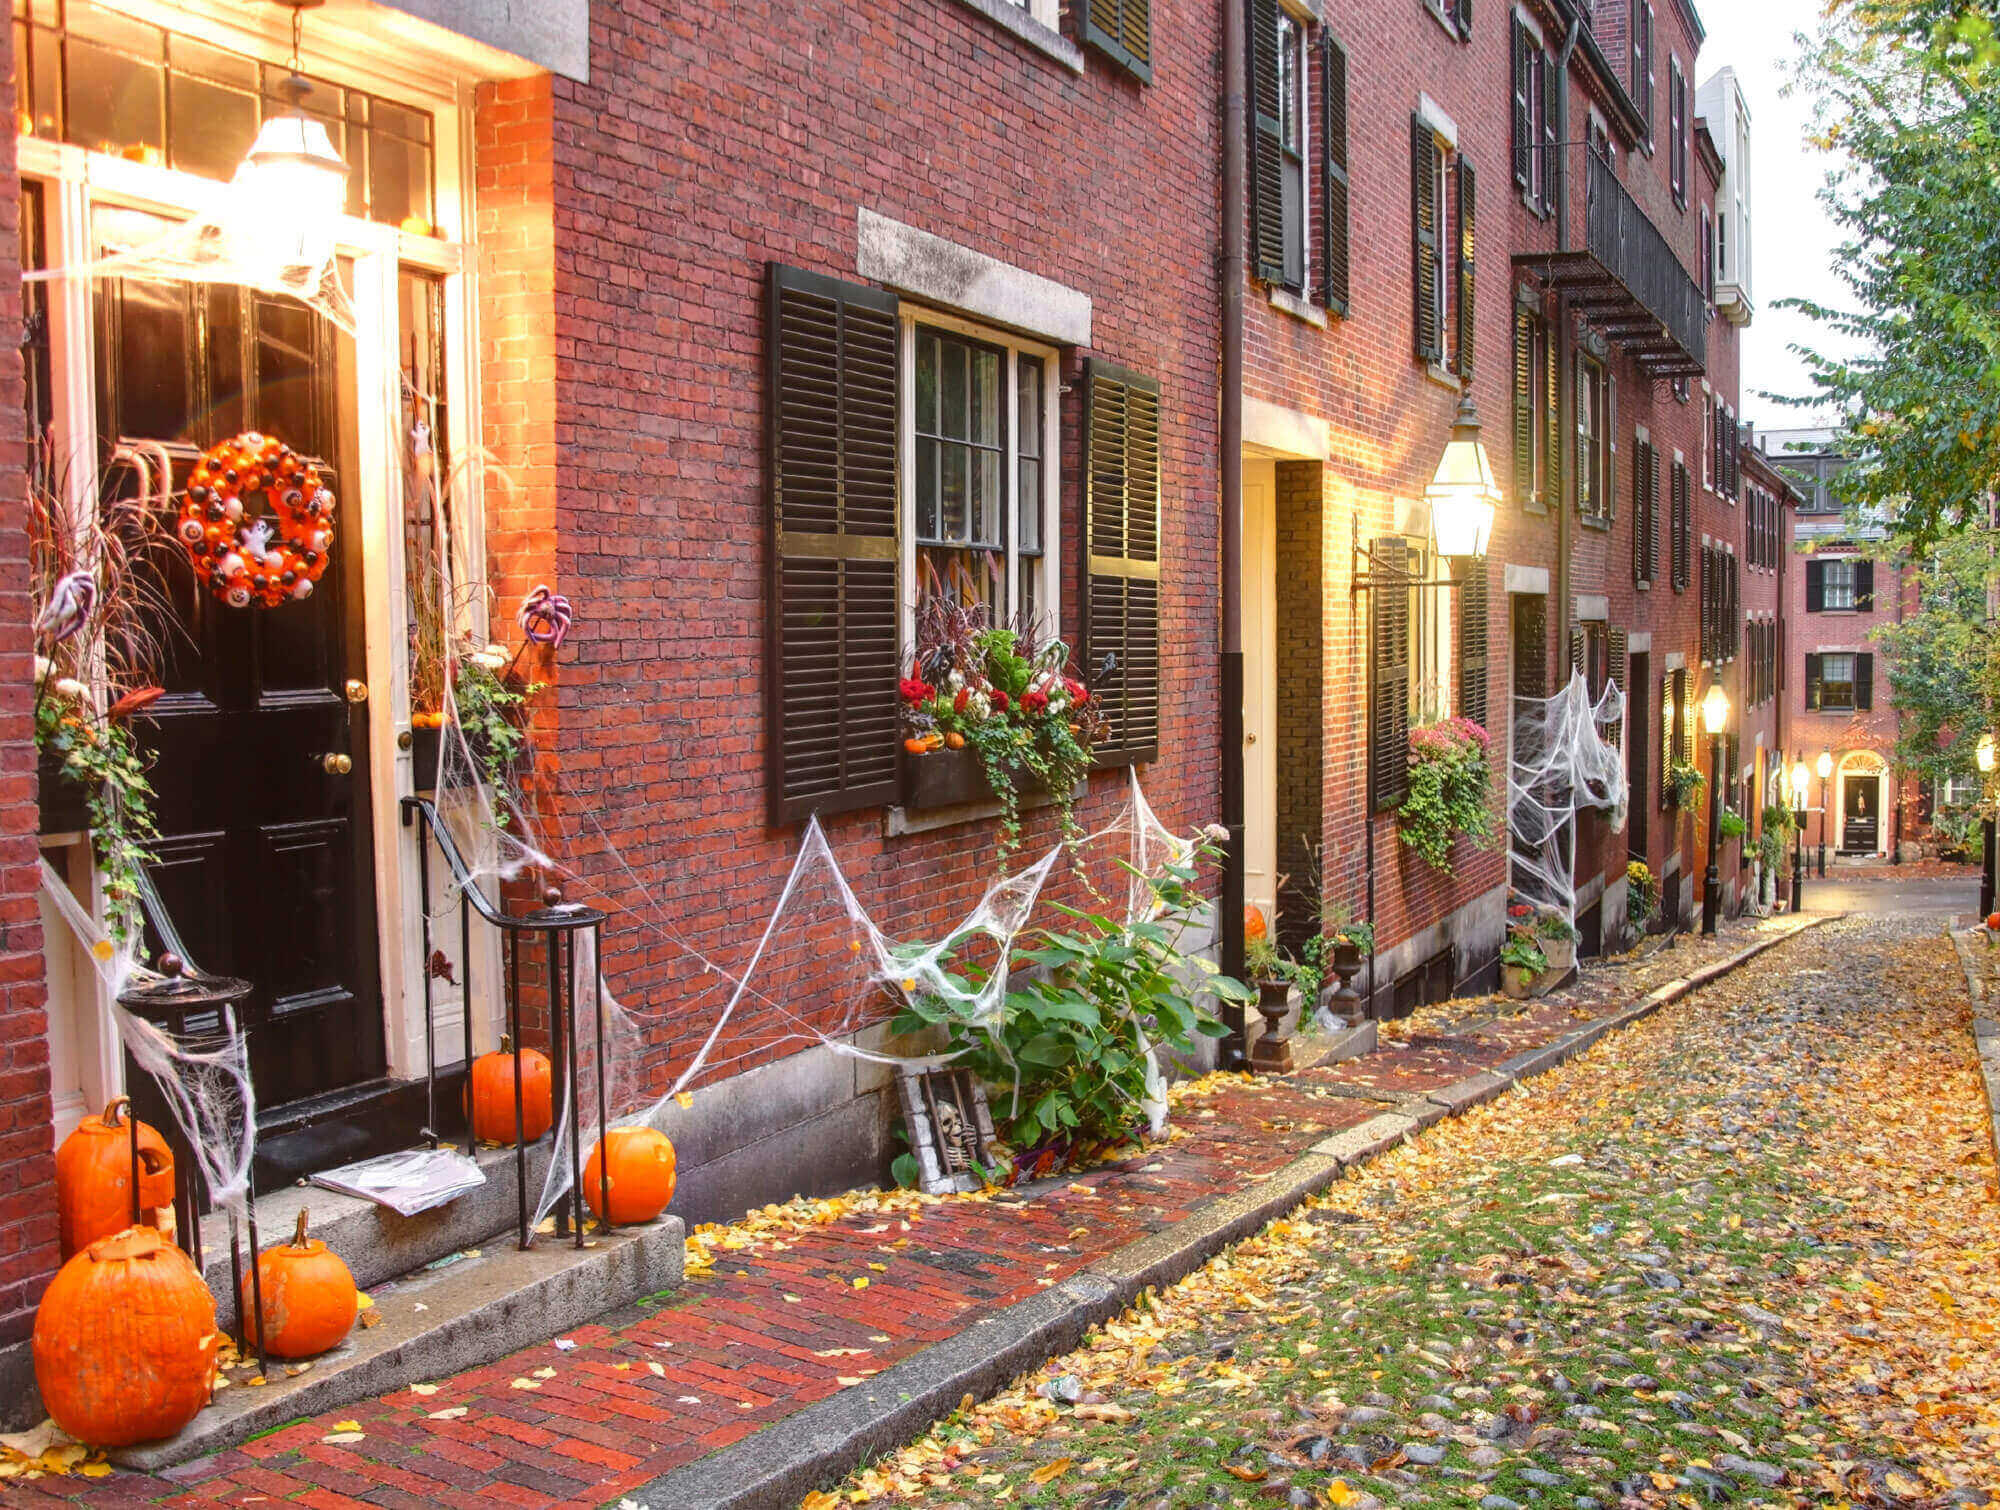 Narrow street on Acort Street, Beacon Hill, Boston offset with residences decorated for Halloween